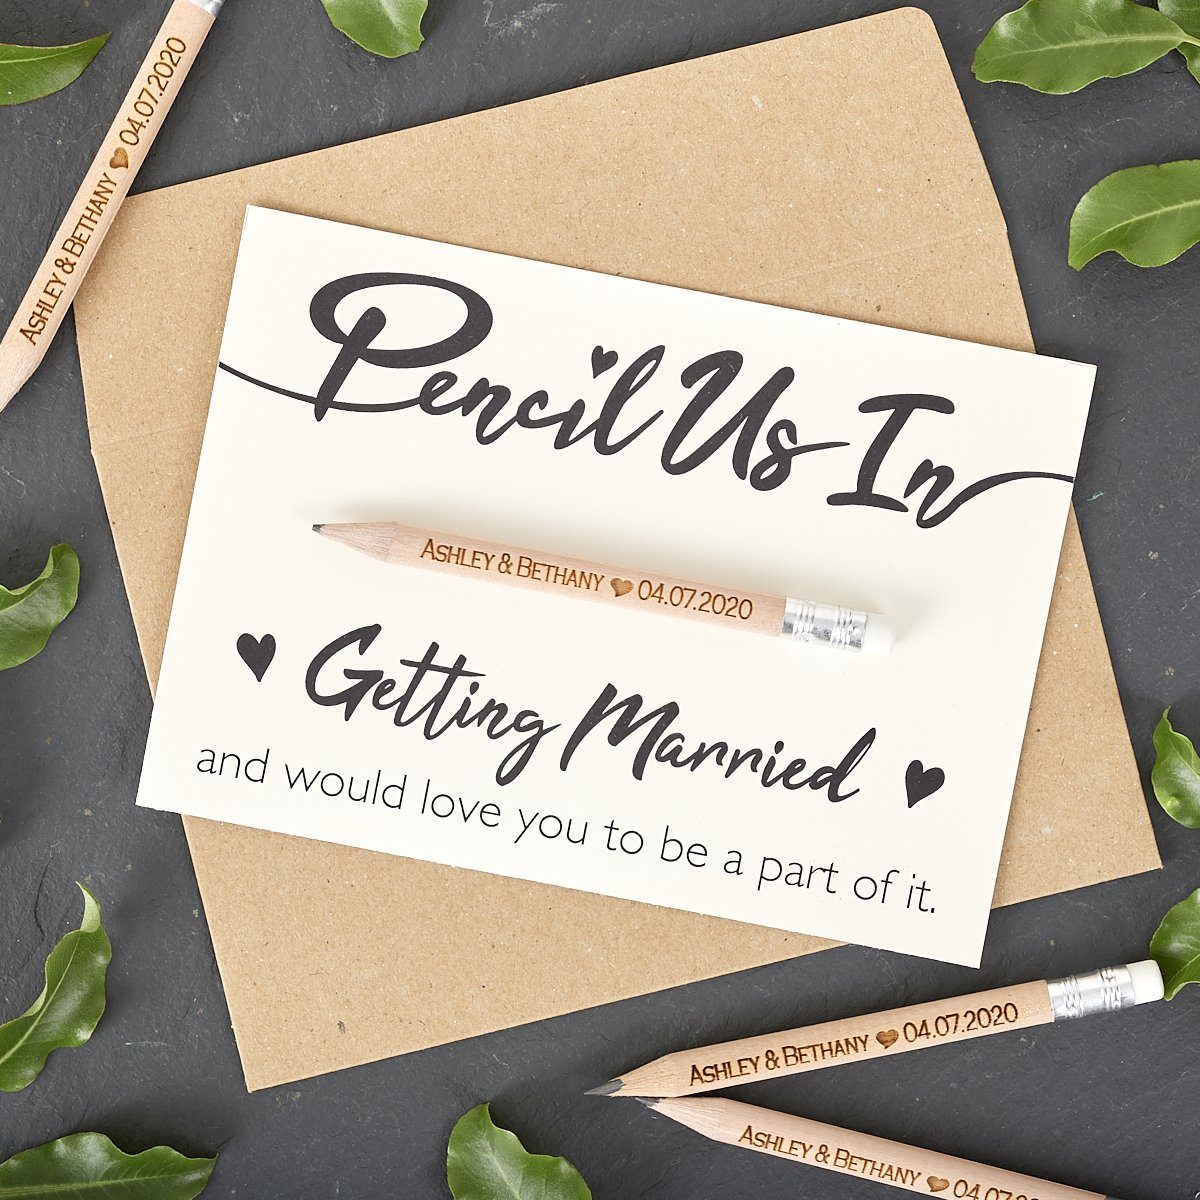 Save The Date Pencils - Pencil Us In Invitations | Save The Date Pencils | Optional Backing Cards & Envelopes